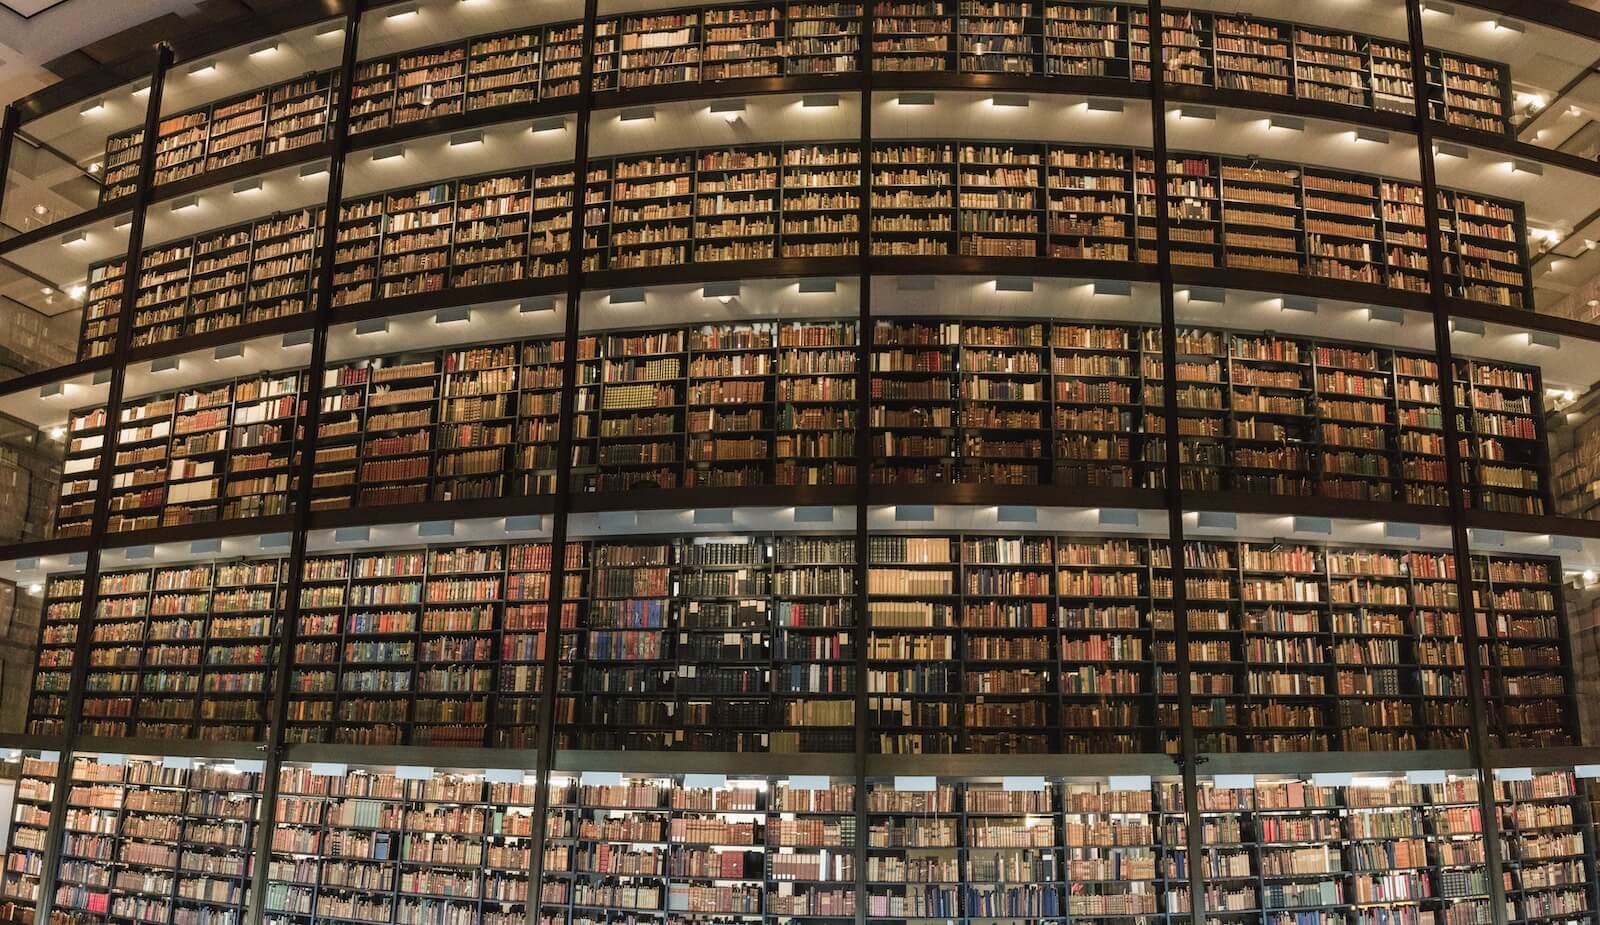 Beinecke Rare Book and Manuscript Library in New Haven, CT